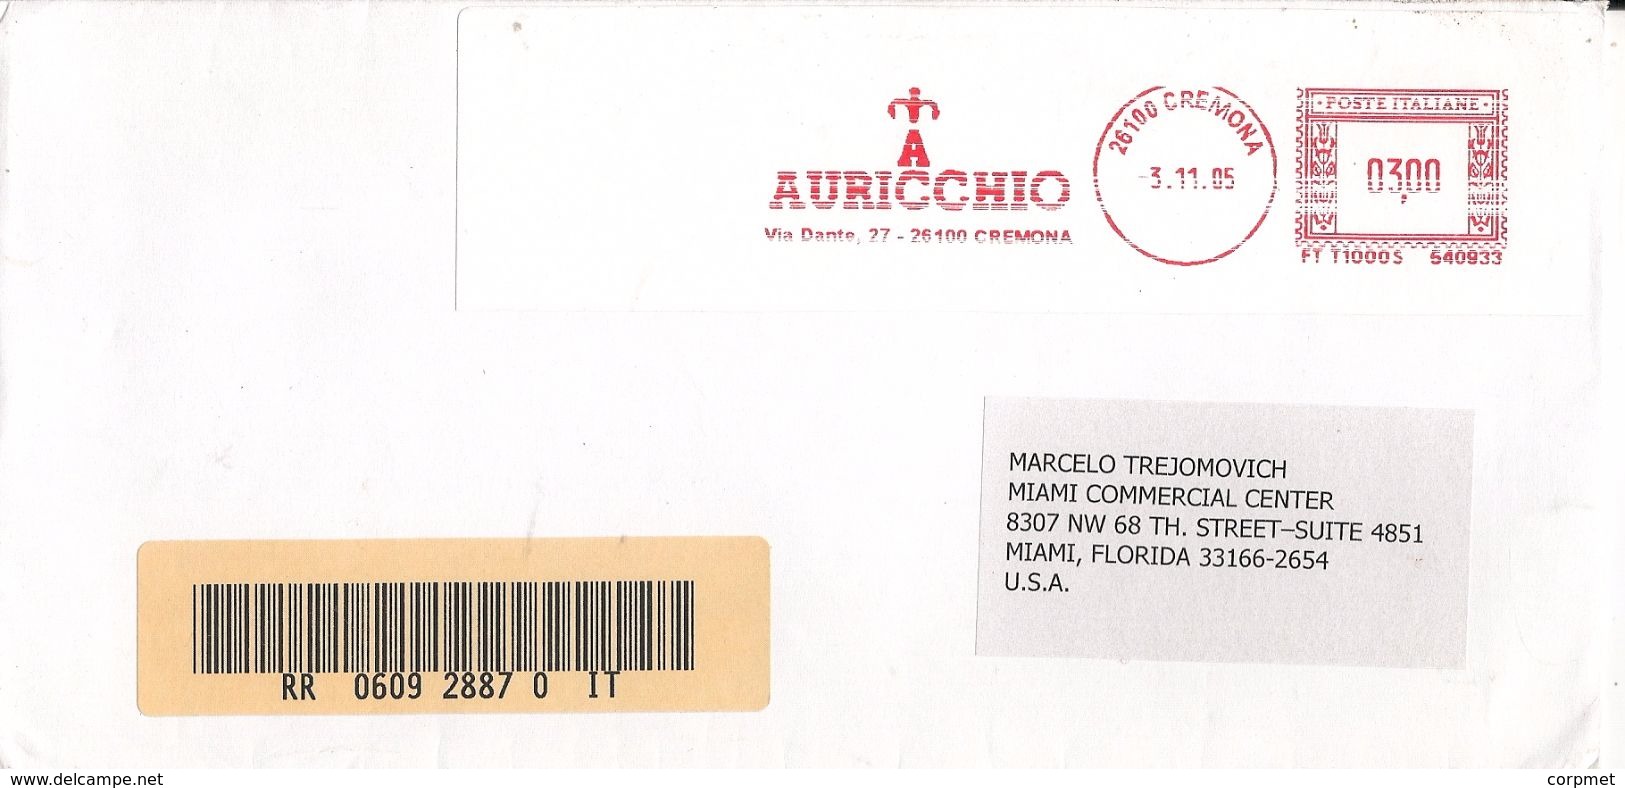 ITALIA - CREMONA 2005 Mechanical Cancel From AURICCHIO - Registered COVER To MIAMI - 2001-10: Poststempel